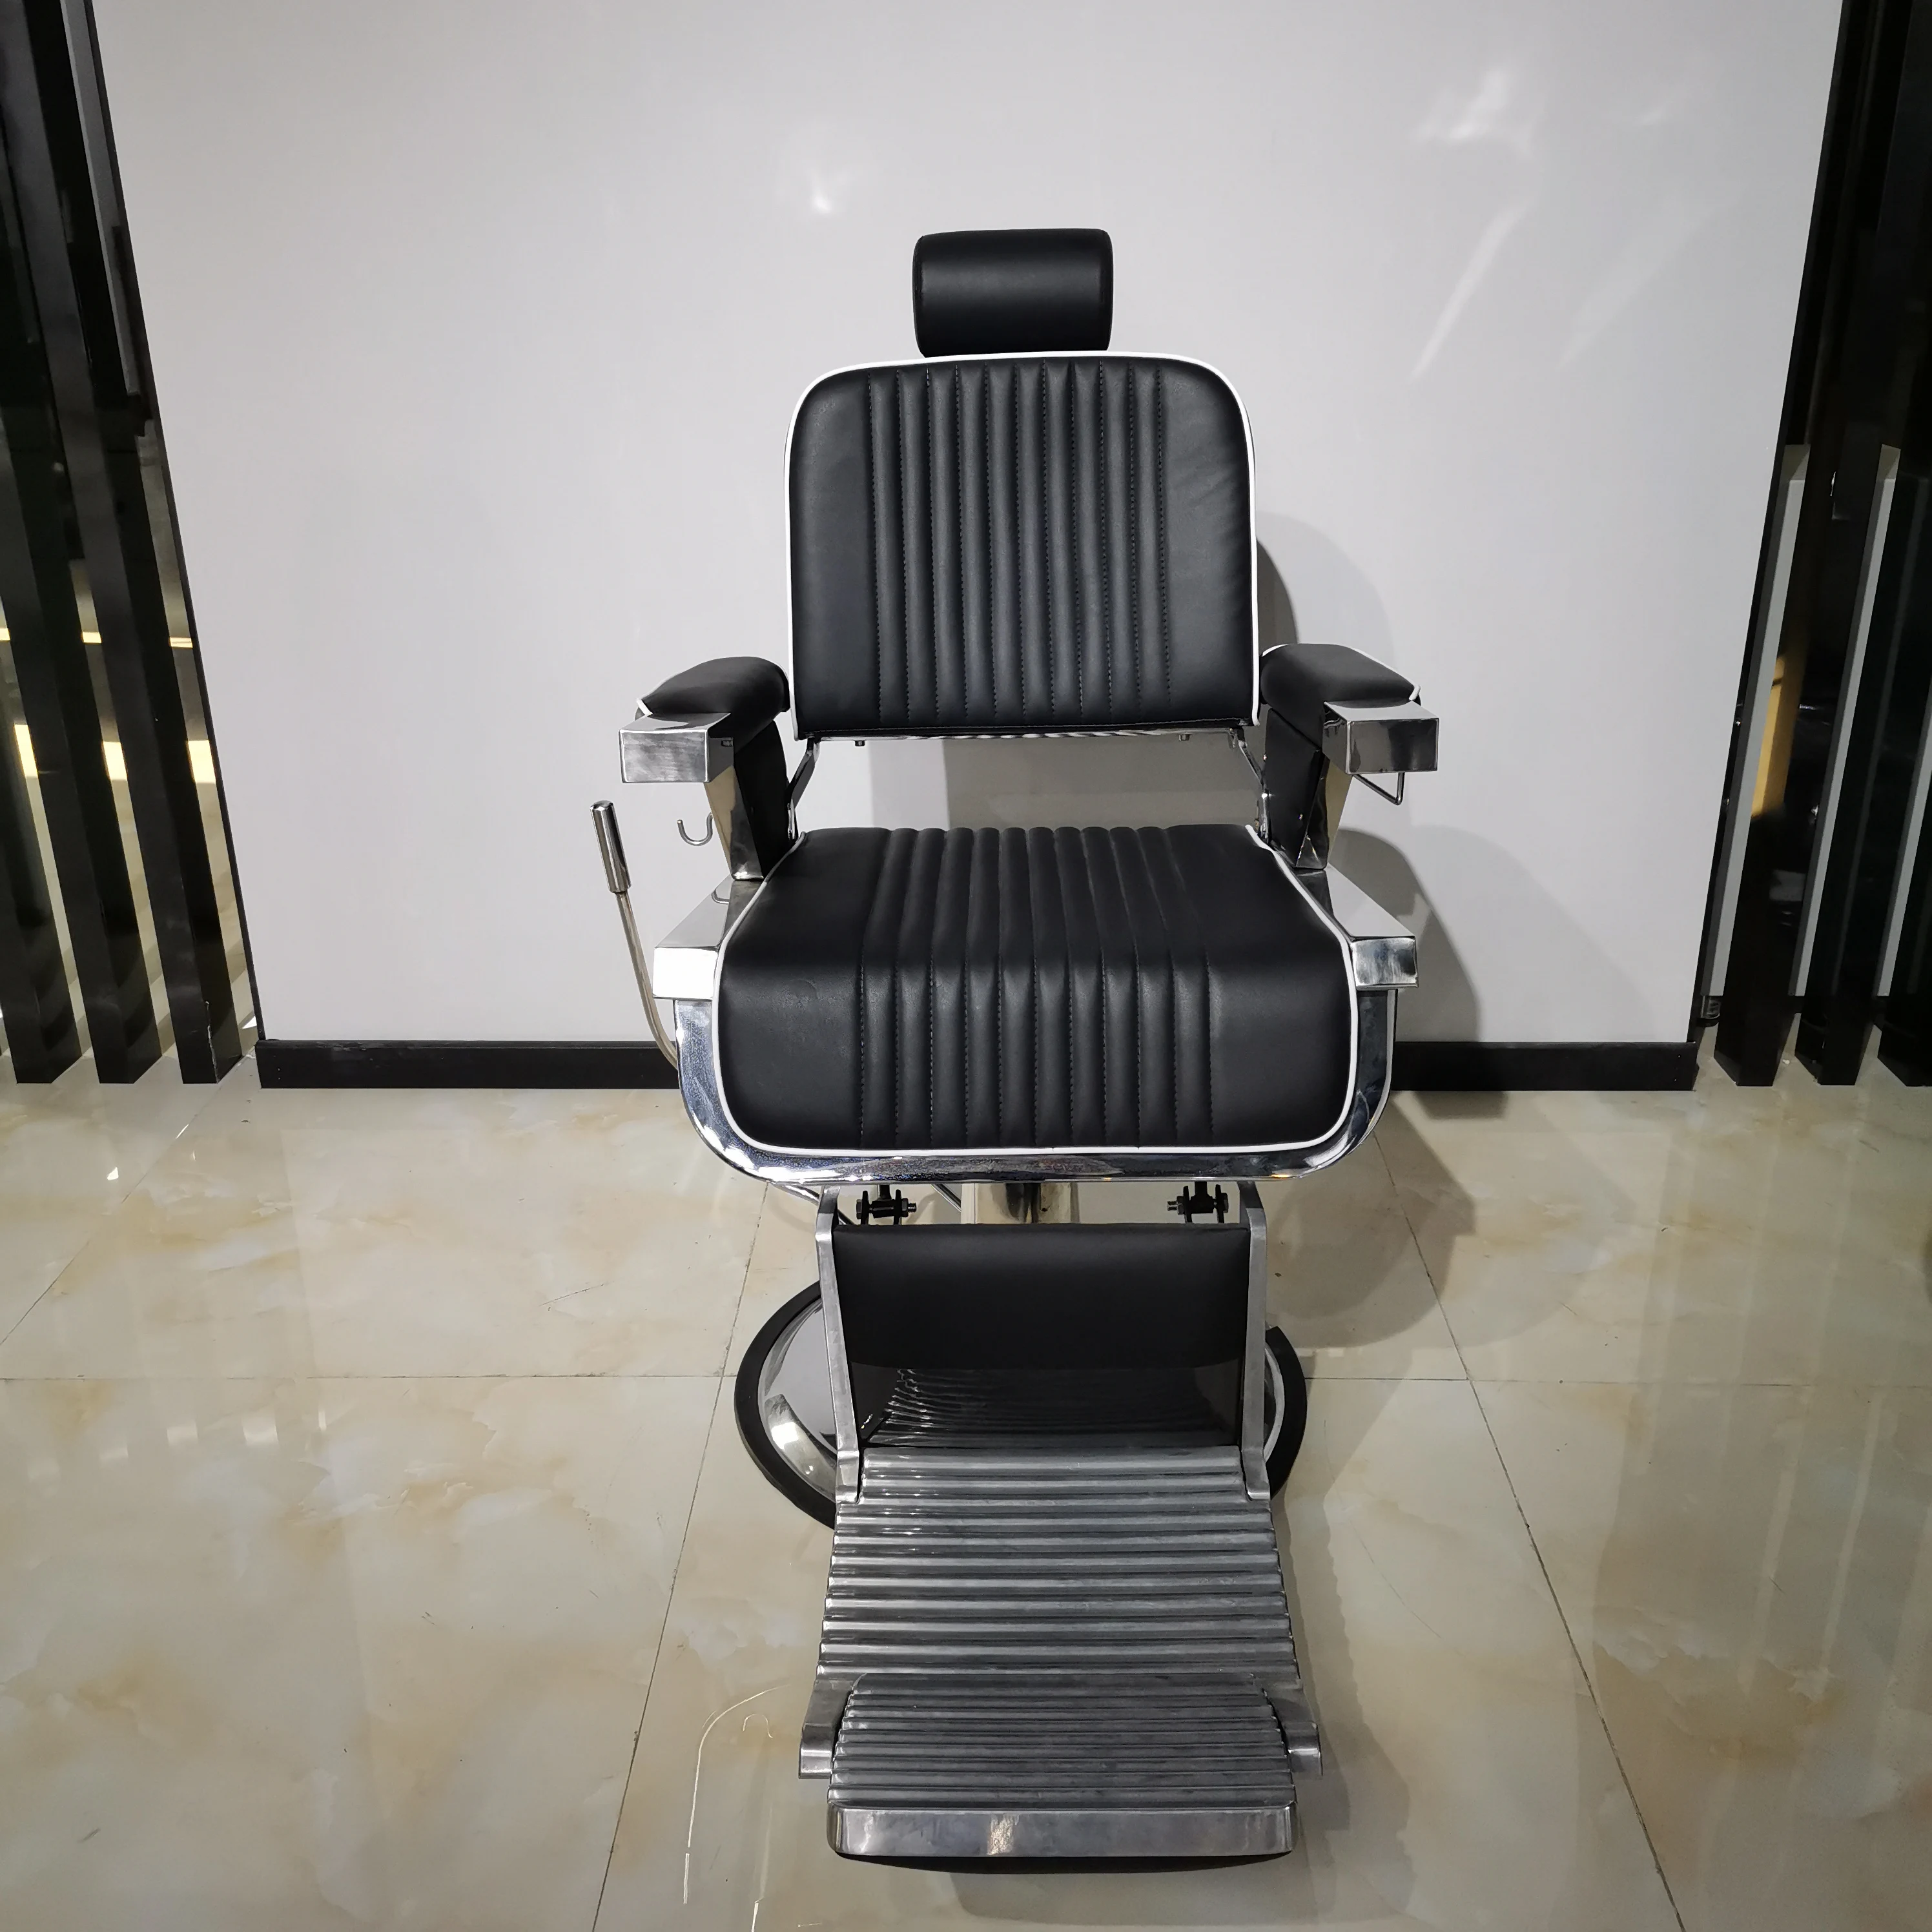 SULIN antique barber chair for beauty salon furniture and barber shop factory supplier